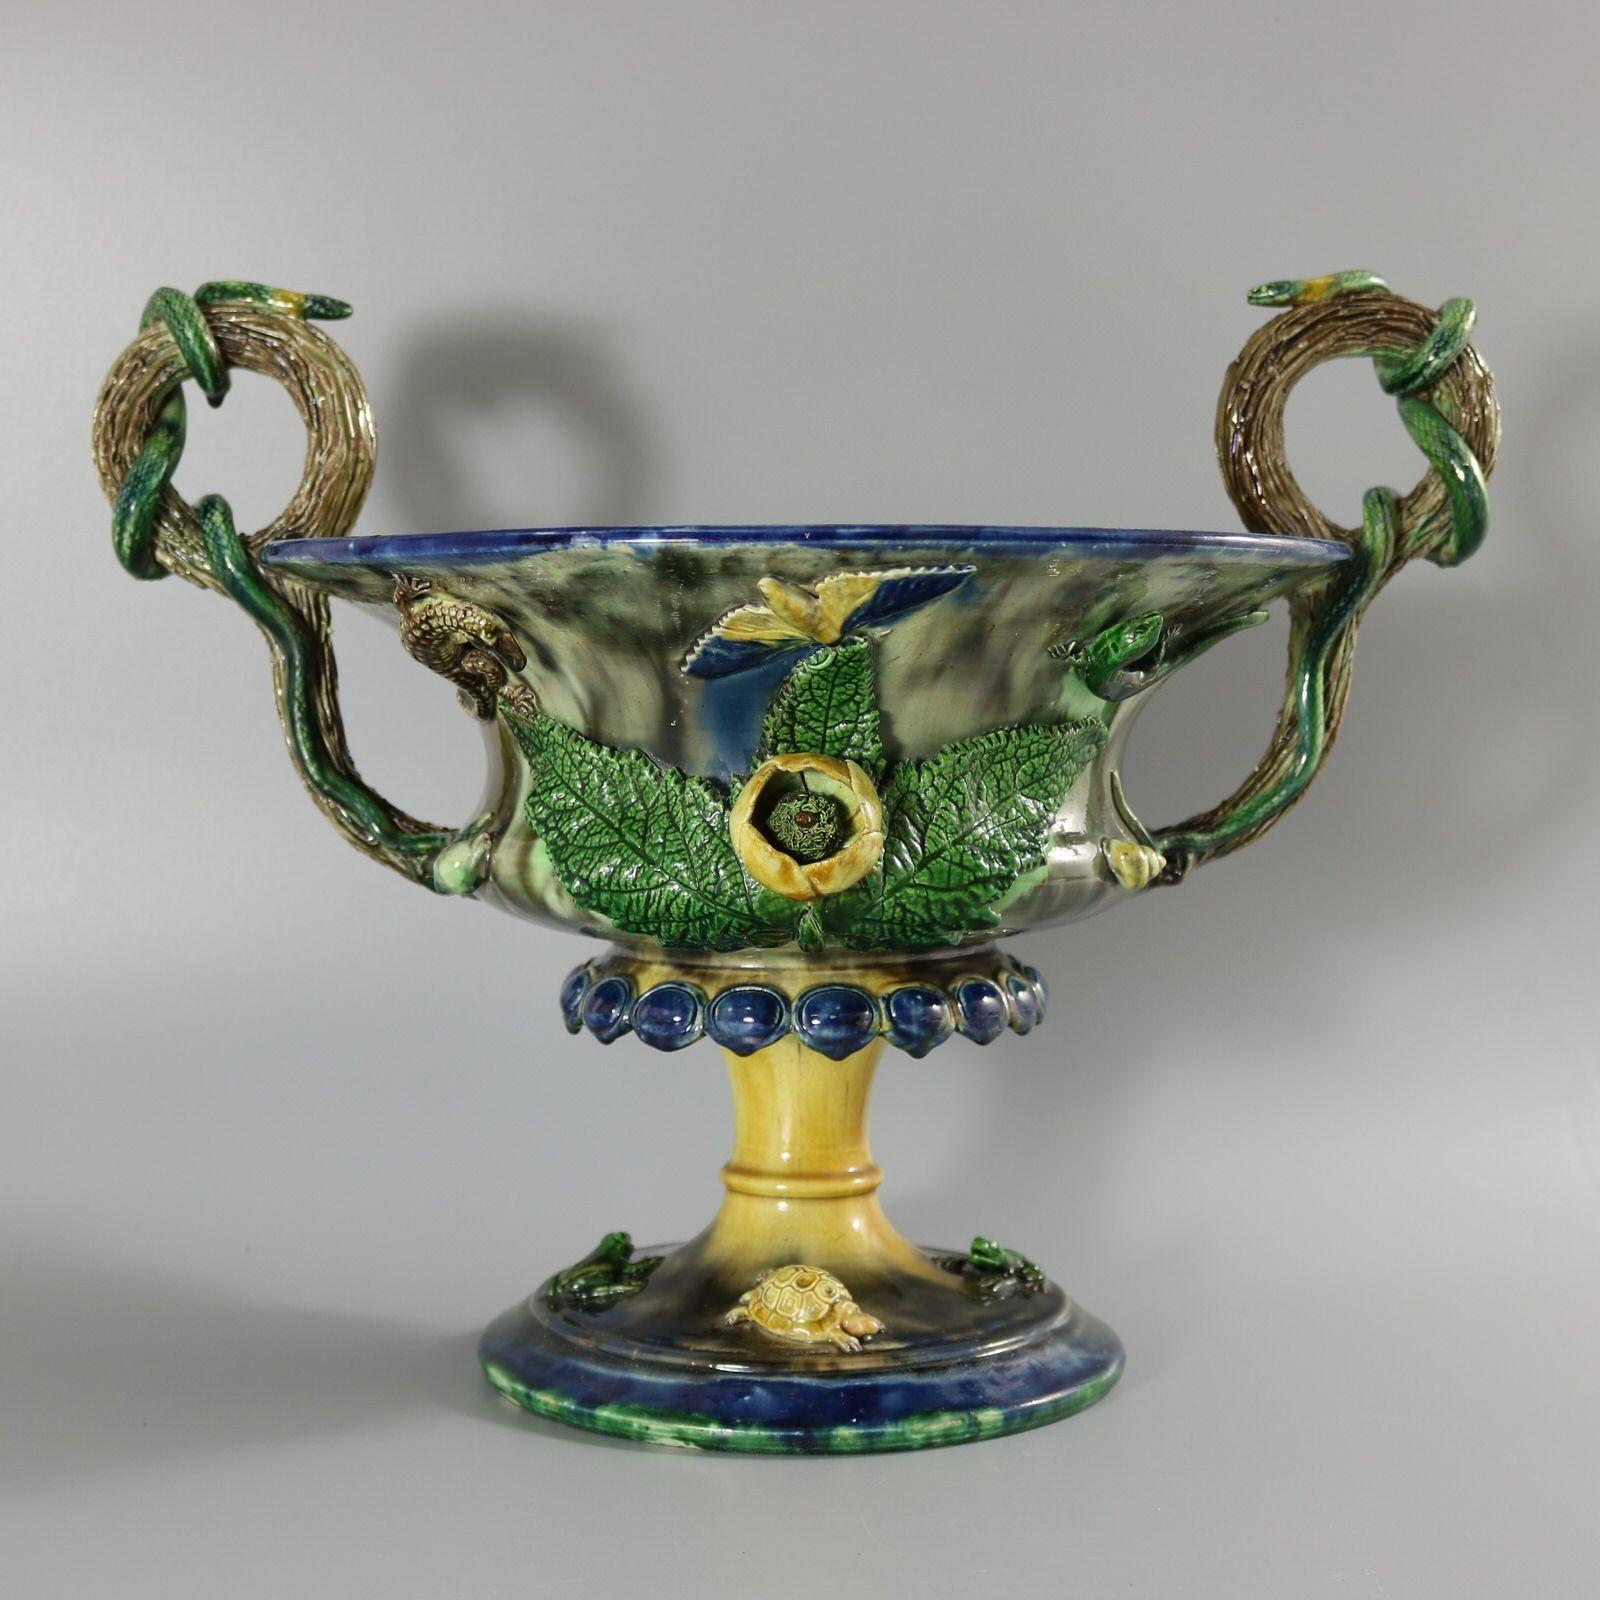 French Palissy Majolica footed jardiniere, which features branch handles with snakes coiled around. The sides of the bowl have applied flowers, leaves, moths lizards and shells. The foot of the planter has a pair of frogs and tortoises. Colouration: